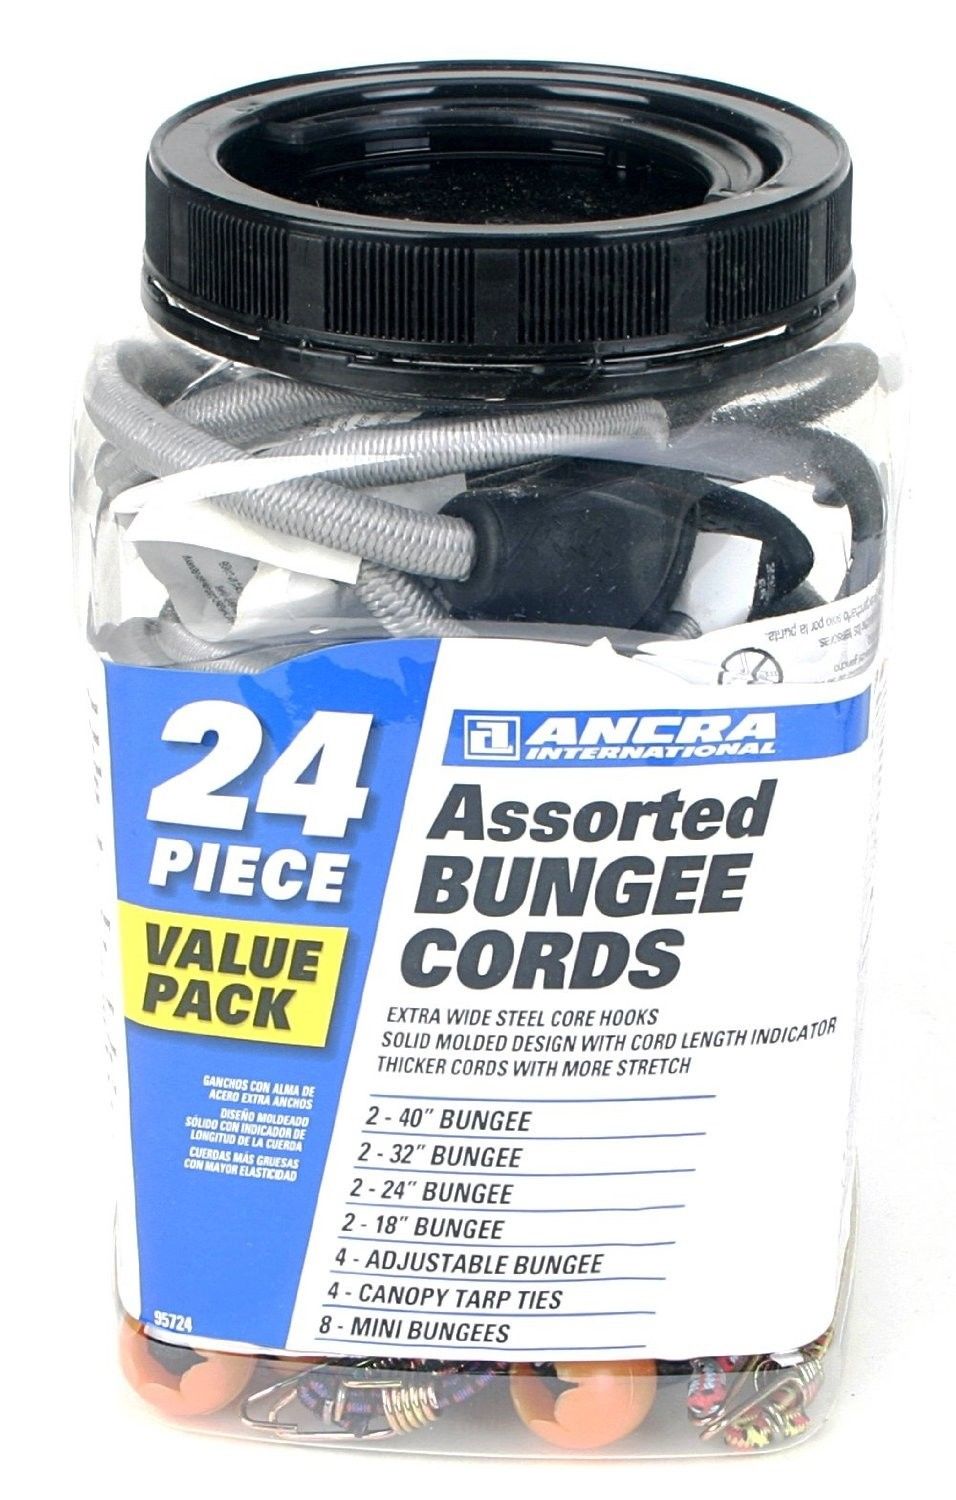 Ancra 95724 Assorted Bungee Cords Gray 24-Piece